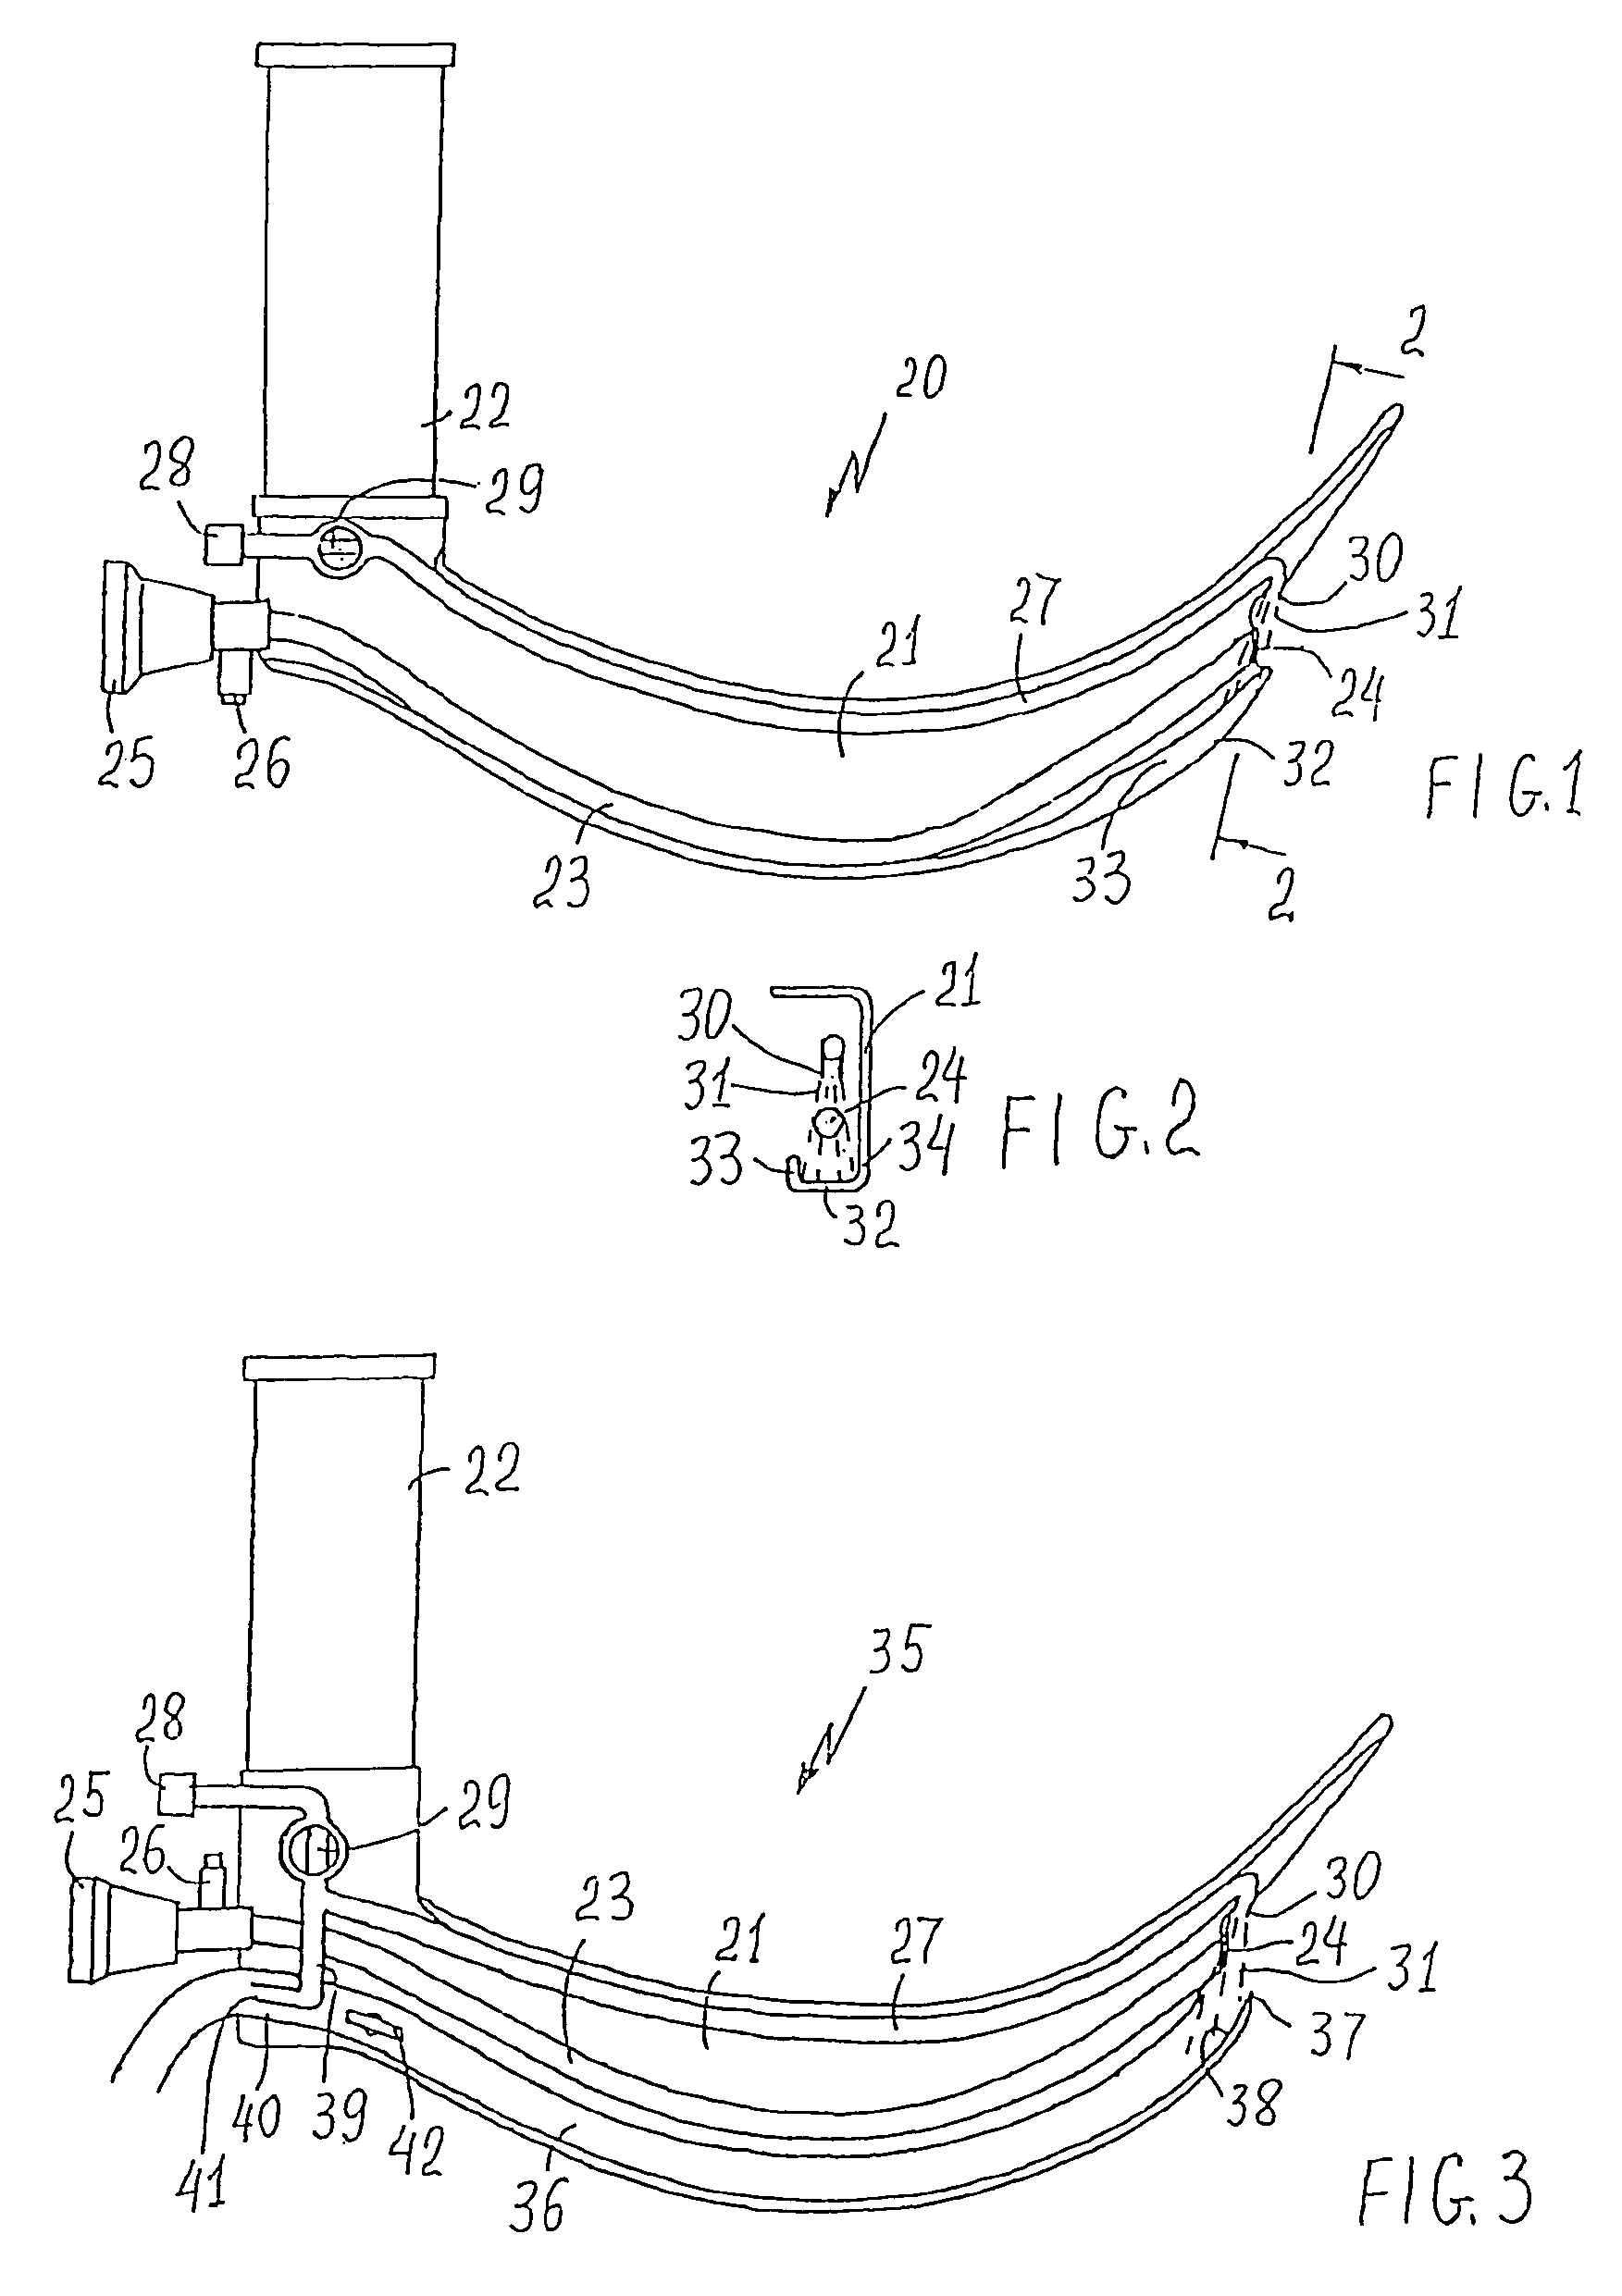 Endoscope with cleaning optics